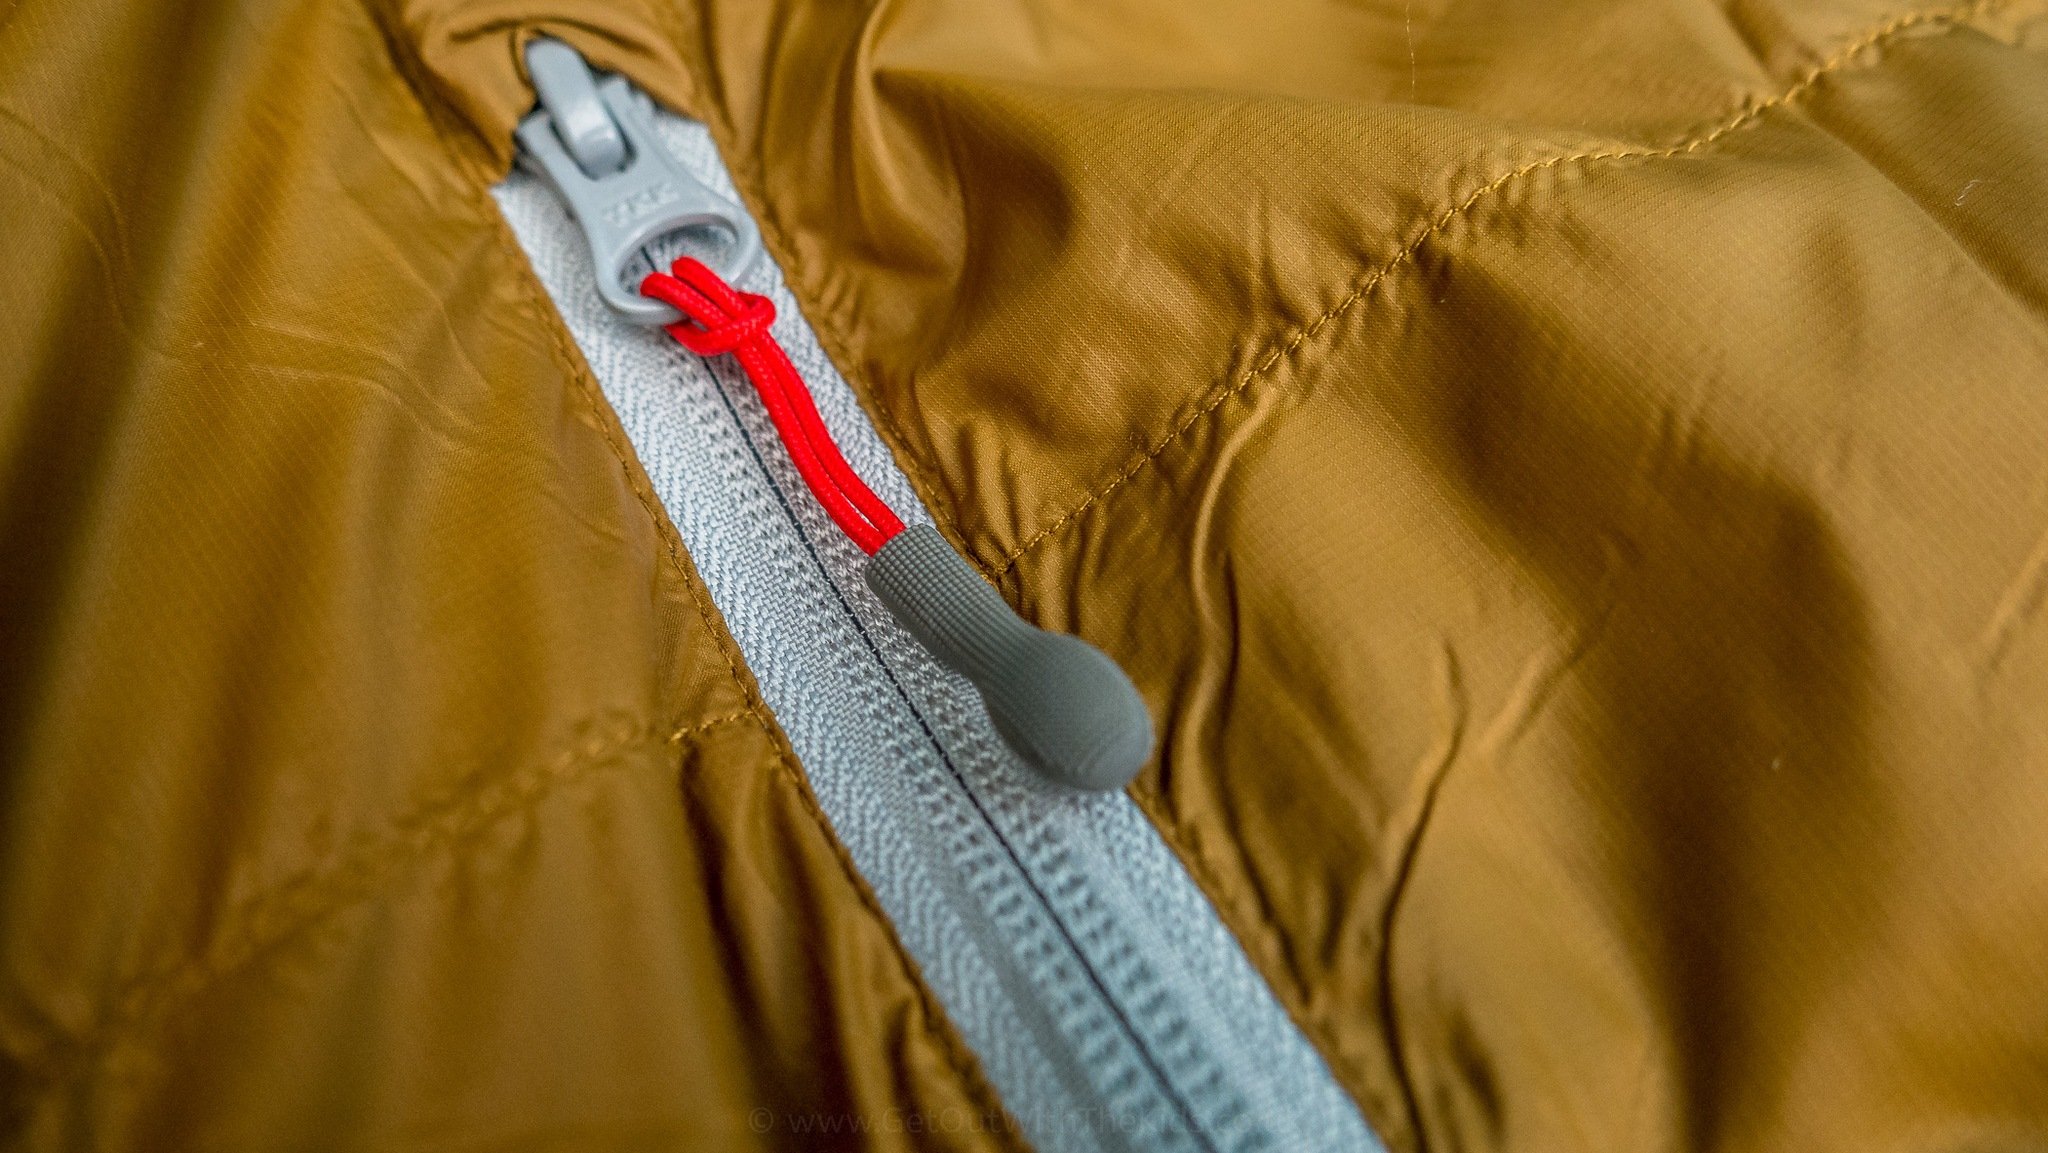 Central zip on the sleeping bag